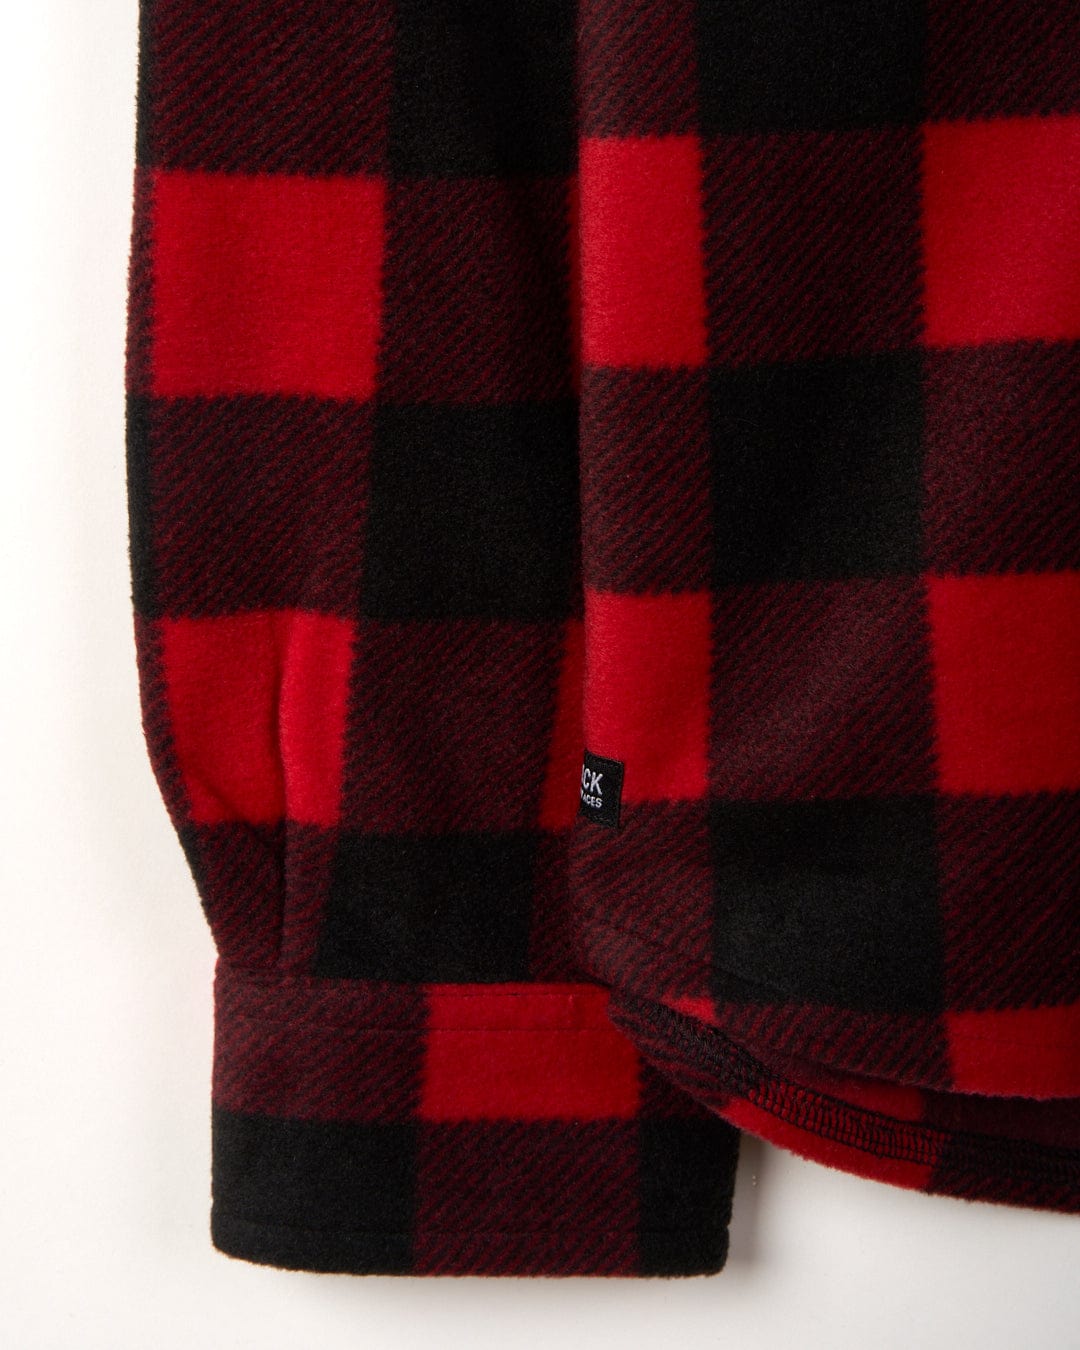 Close-up of a Saltrock Waldron - Mens Long Sleeve Shirt - Red/black check fabric with a visible clothing tag, illustrating the texture and pattern of the material.